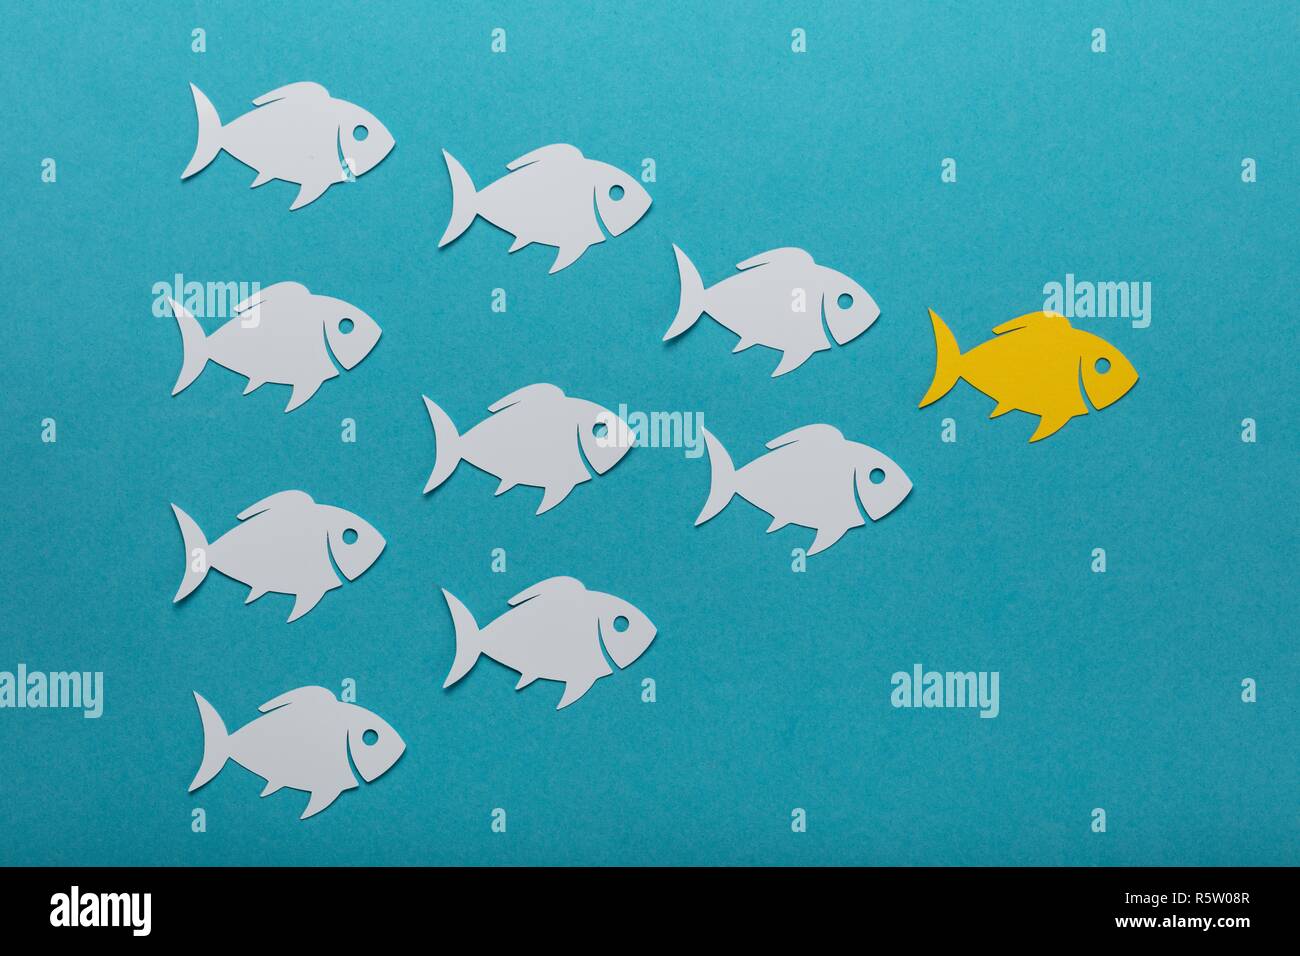 Concept Of White Fishes Following Yellow Fish Stock Photo